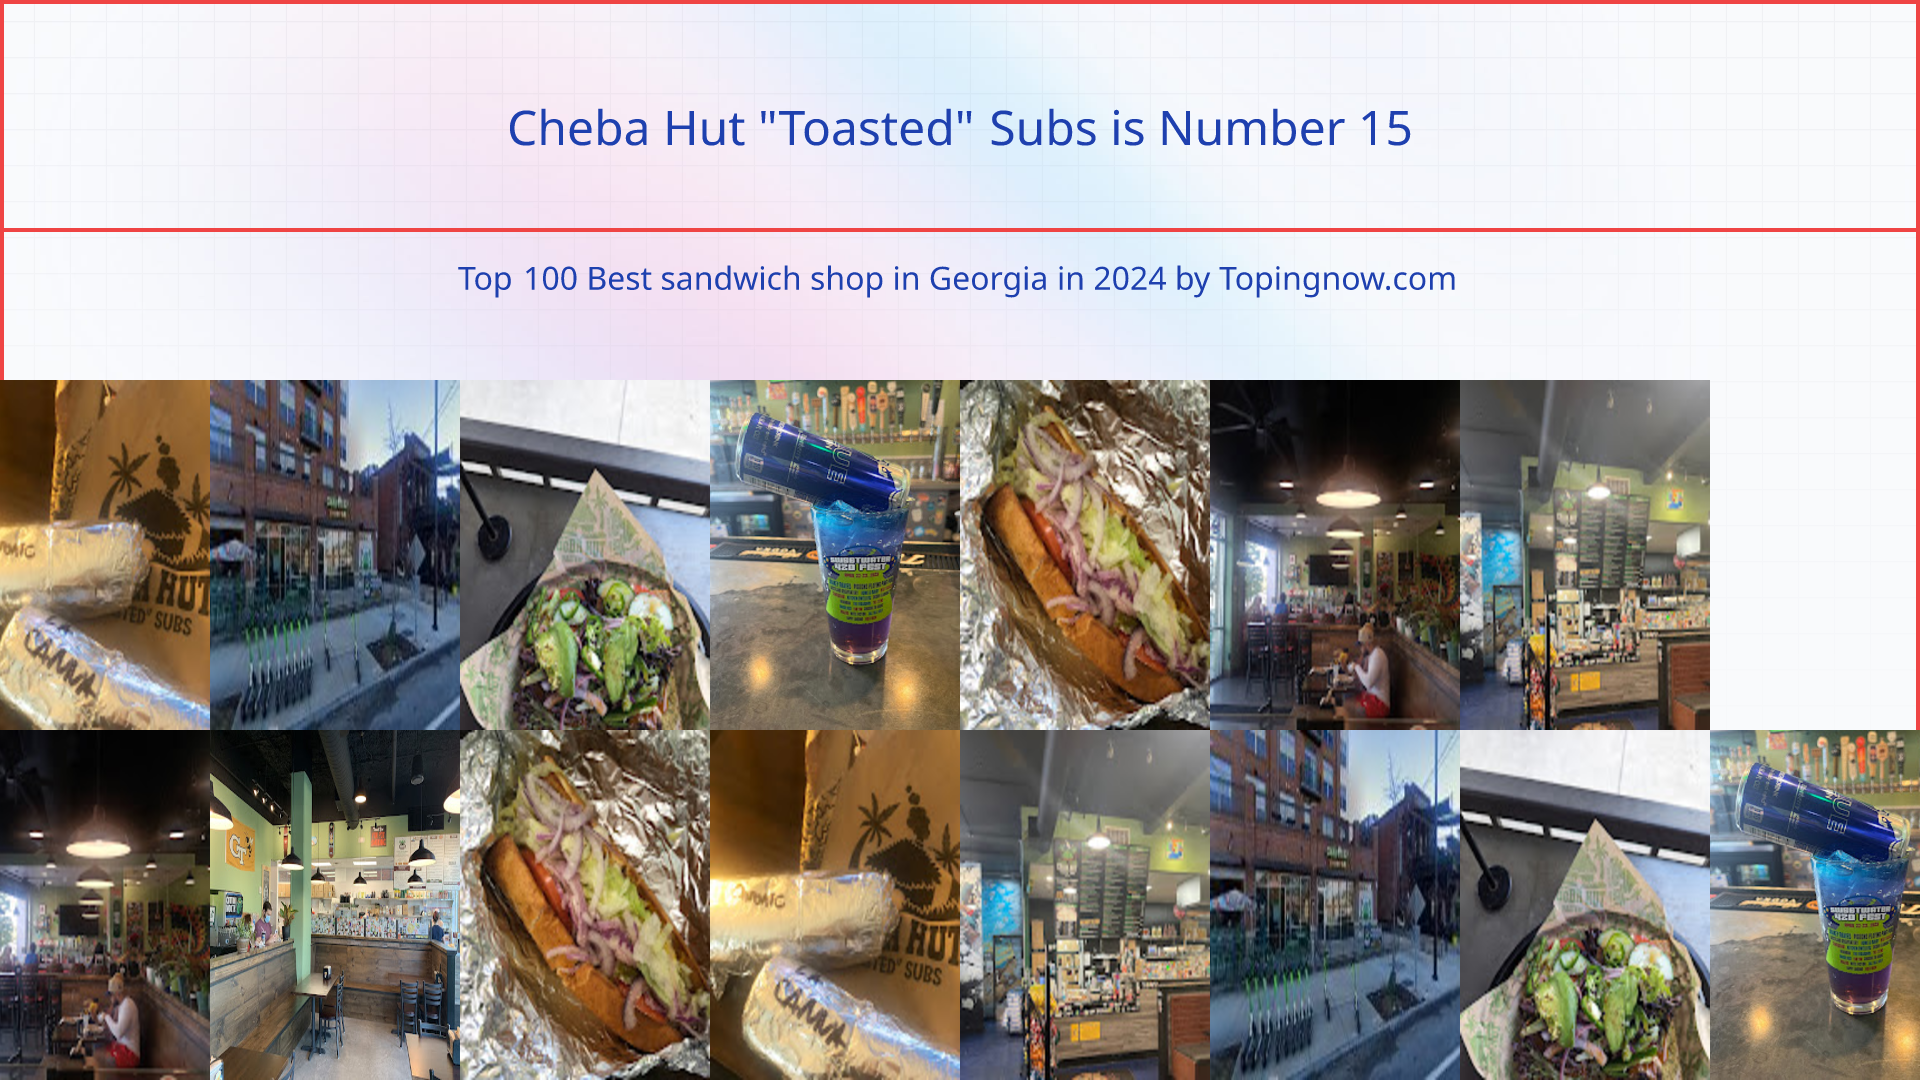 Cheba Hut "Toasted" Subs: Top 100 Best sandwich shop in Georgia in 2024